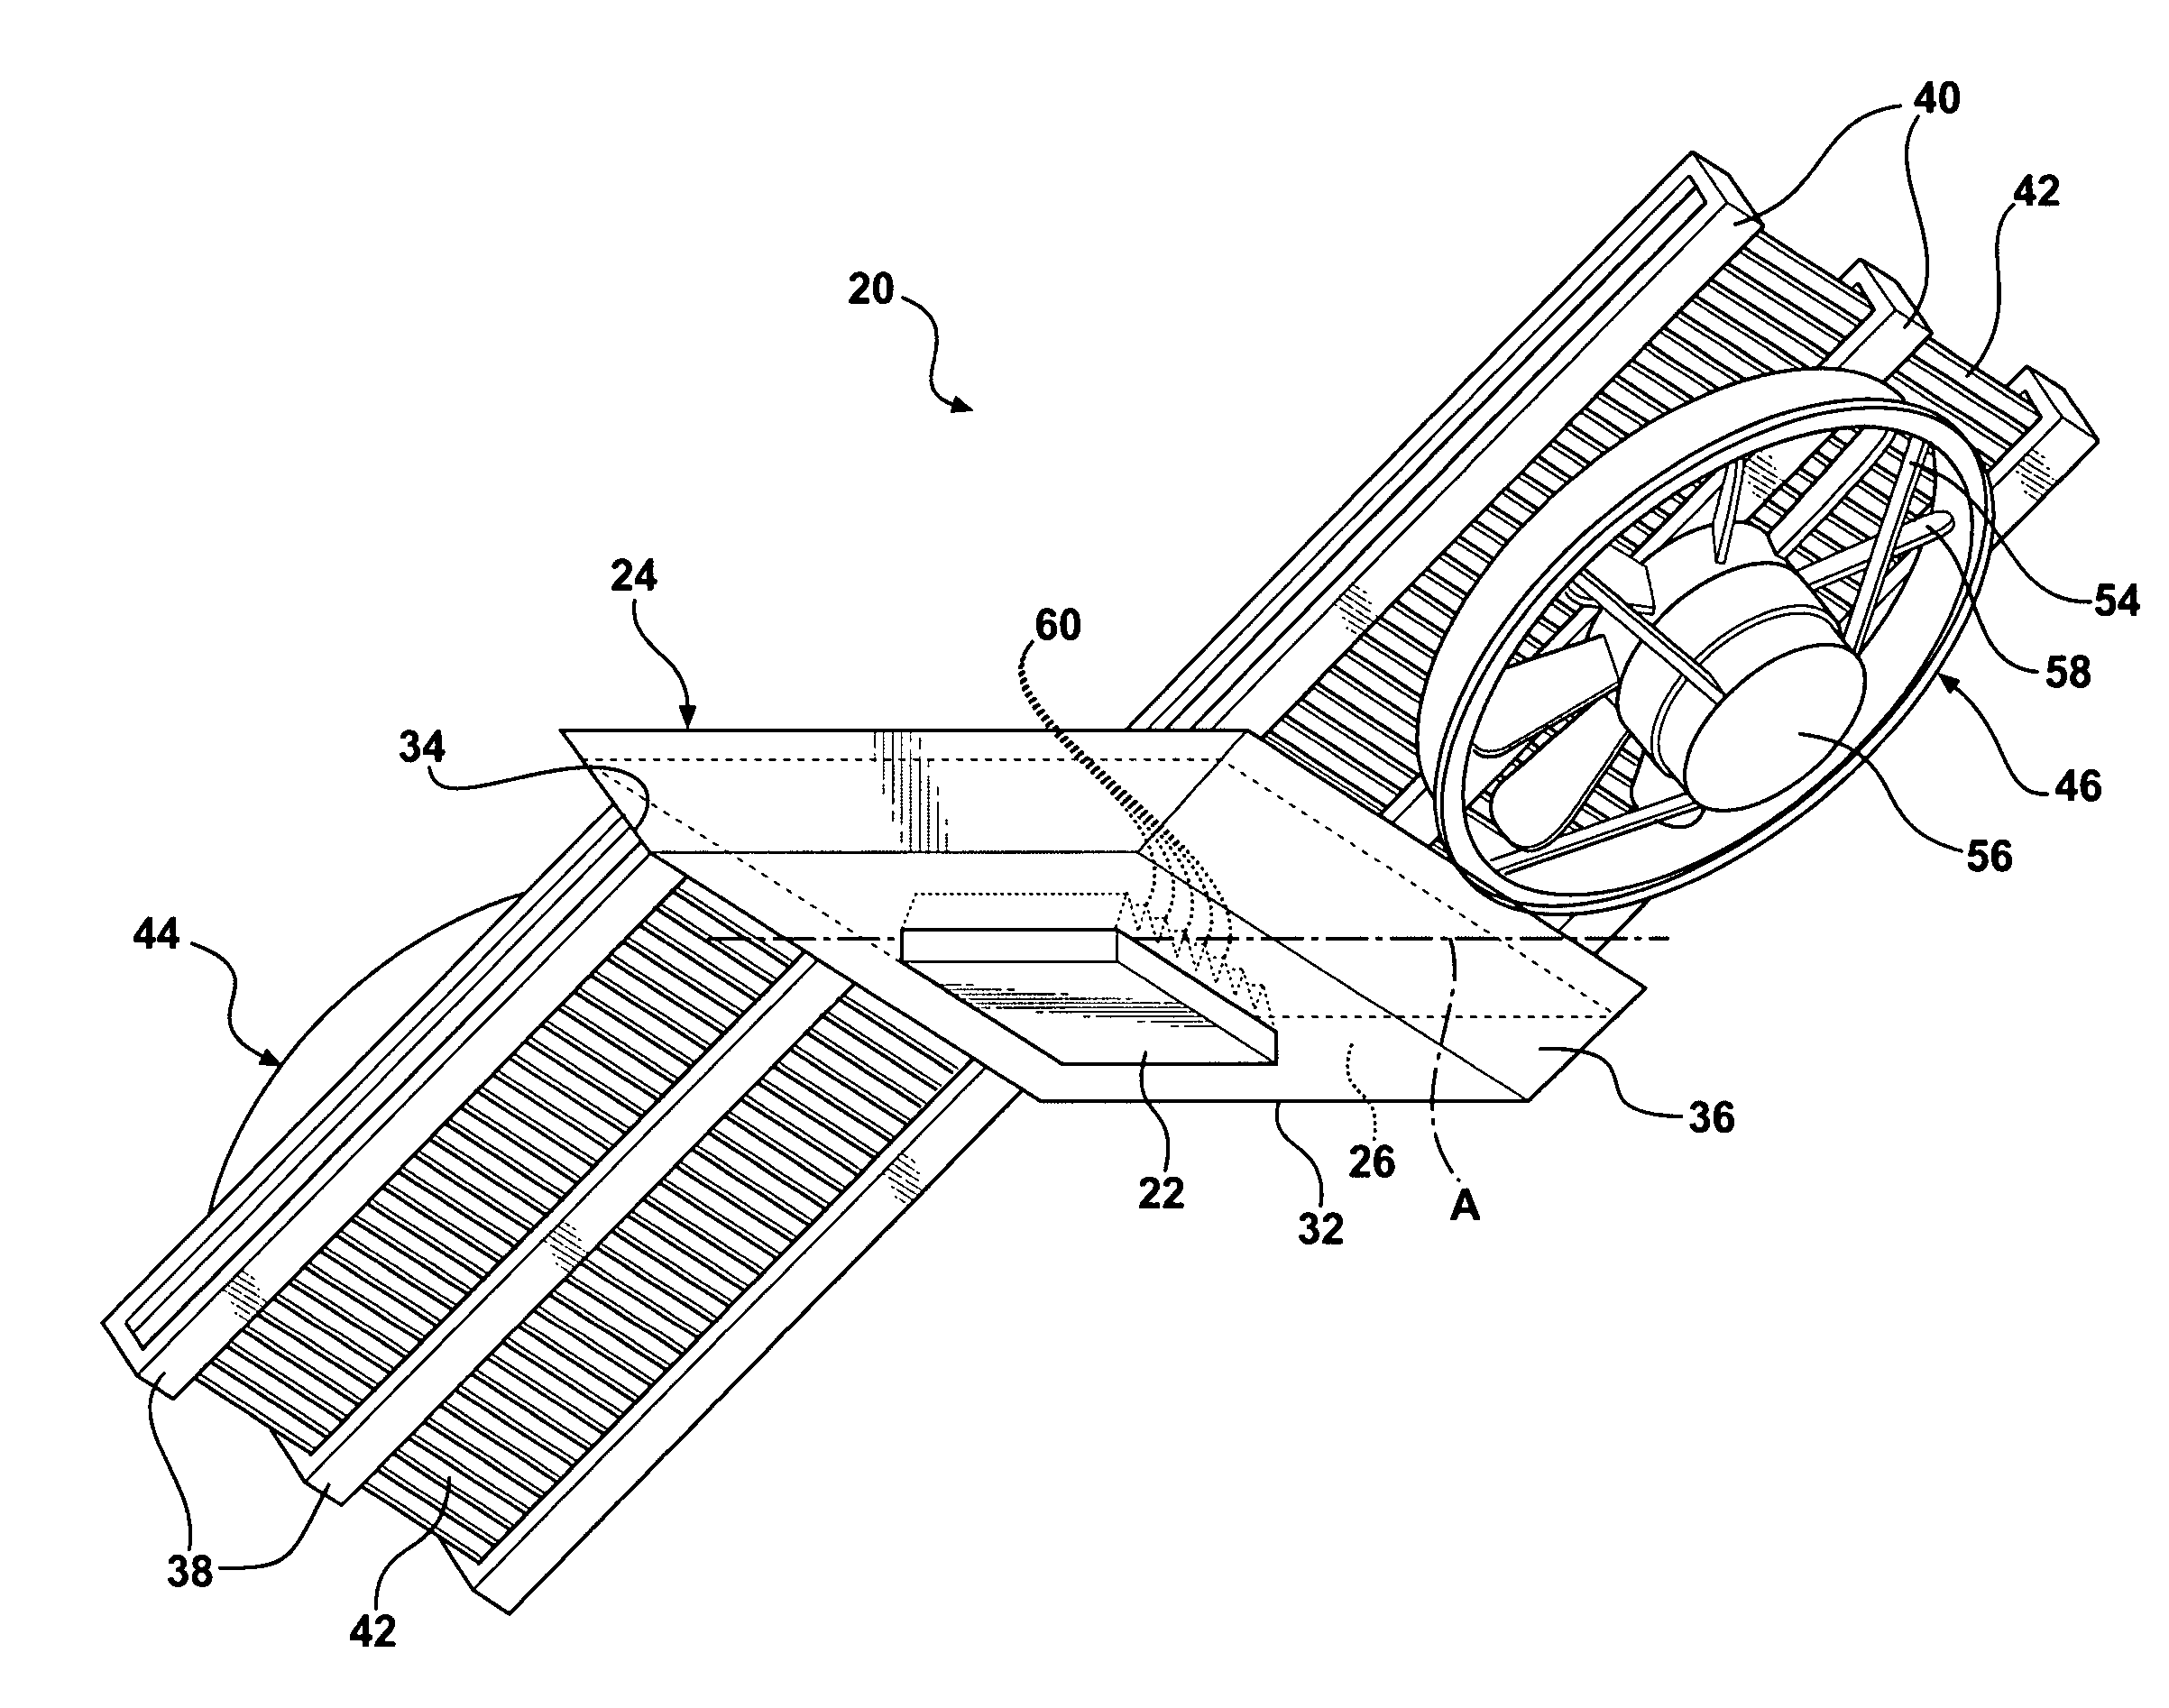 Orientation insensitive thermosiphon capable of operation in upside down position